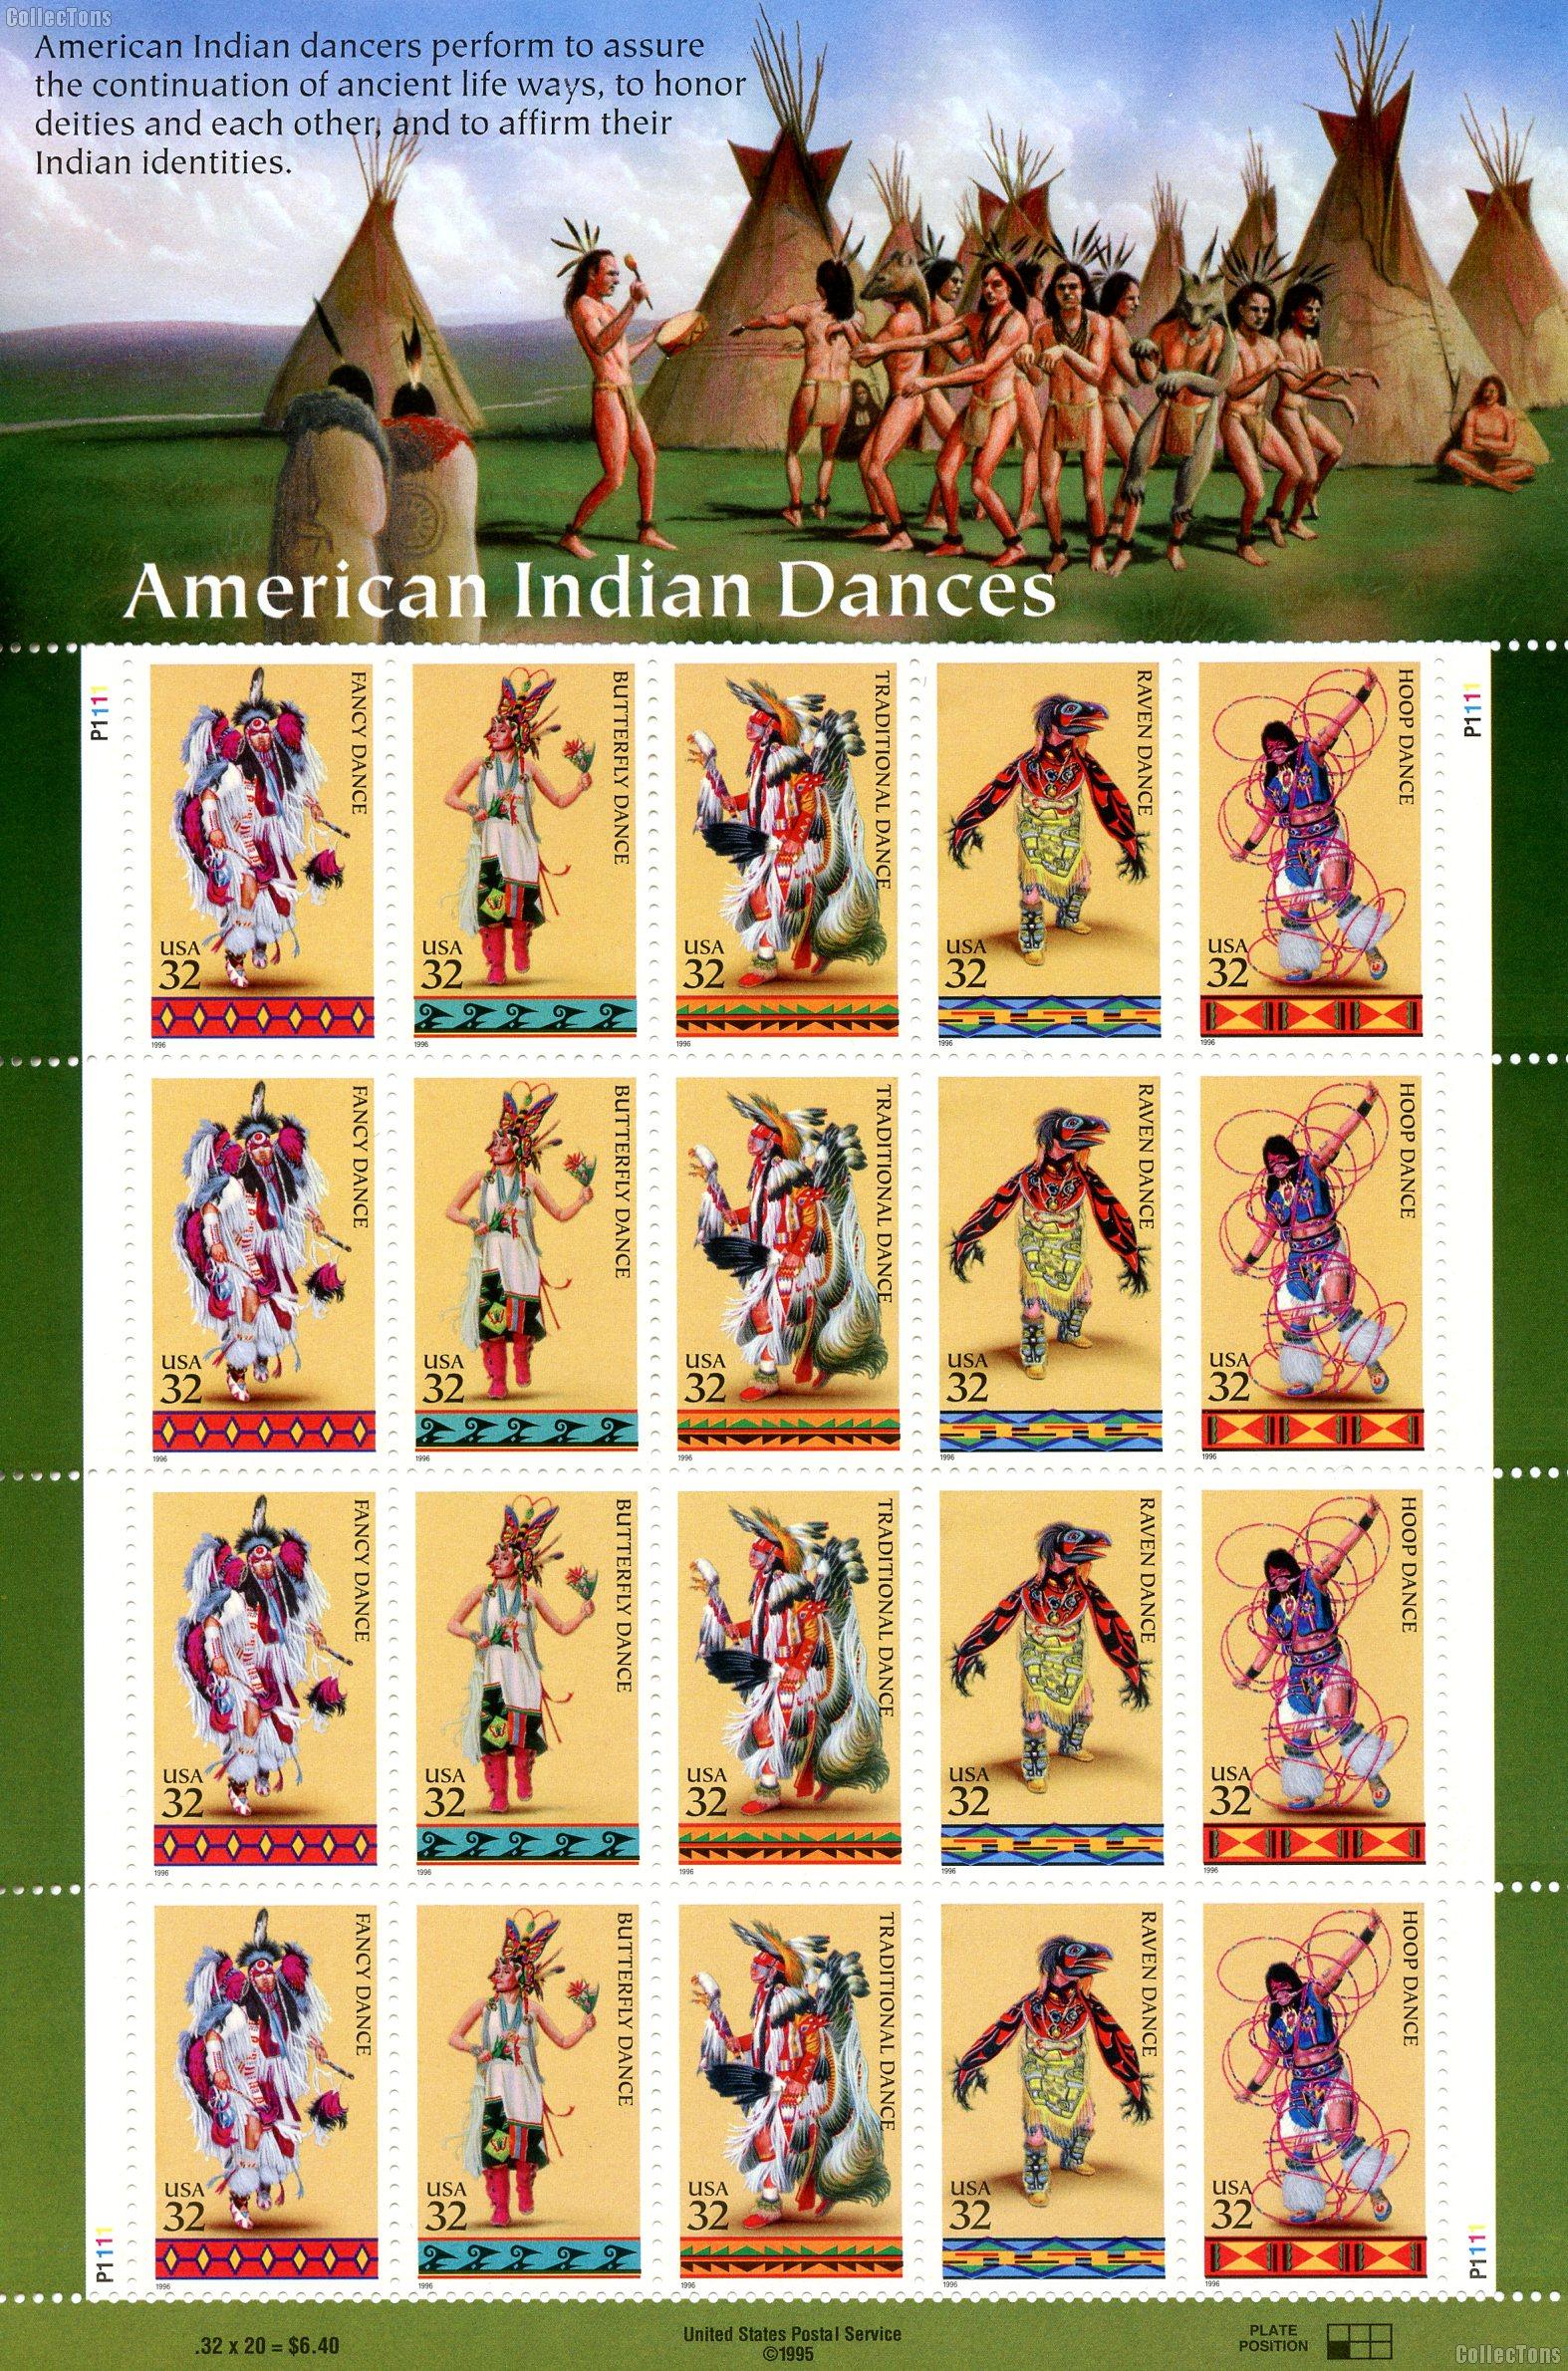 1996 American Indian Dances 32 Cent US Postage Stamp MNH Sheet of 20 Scott #3072-3076